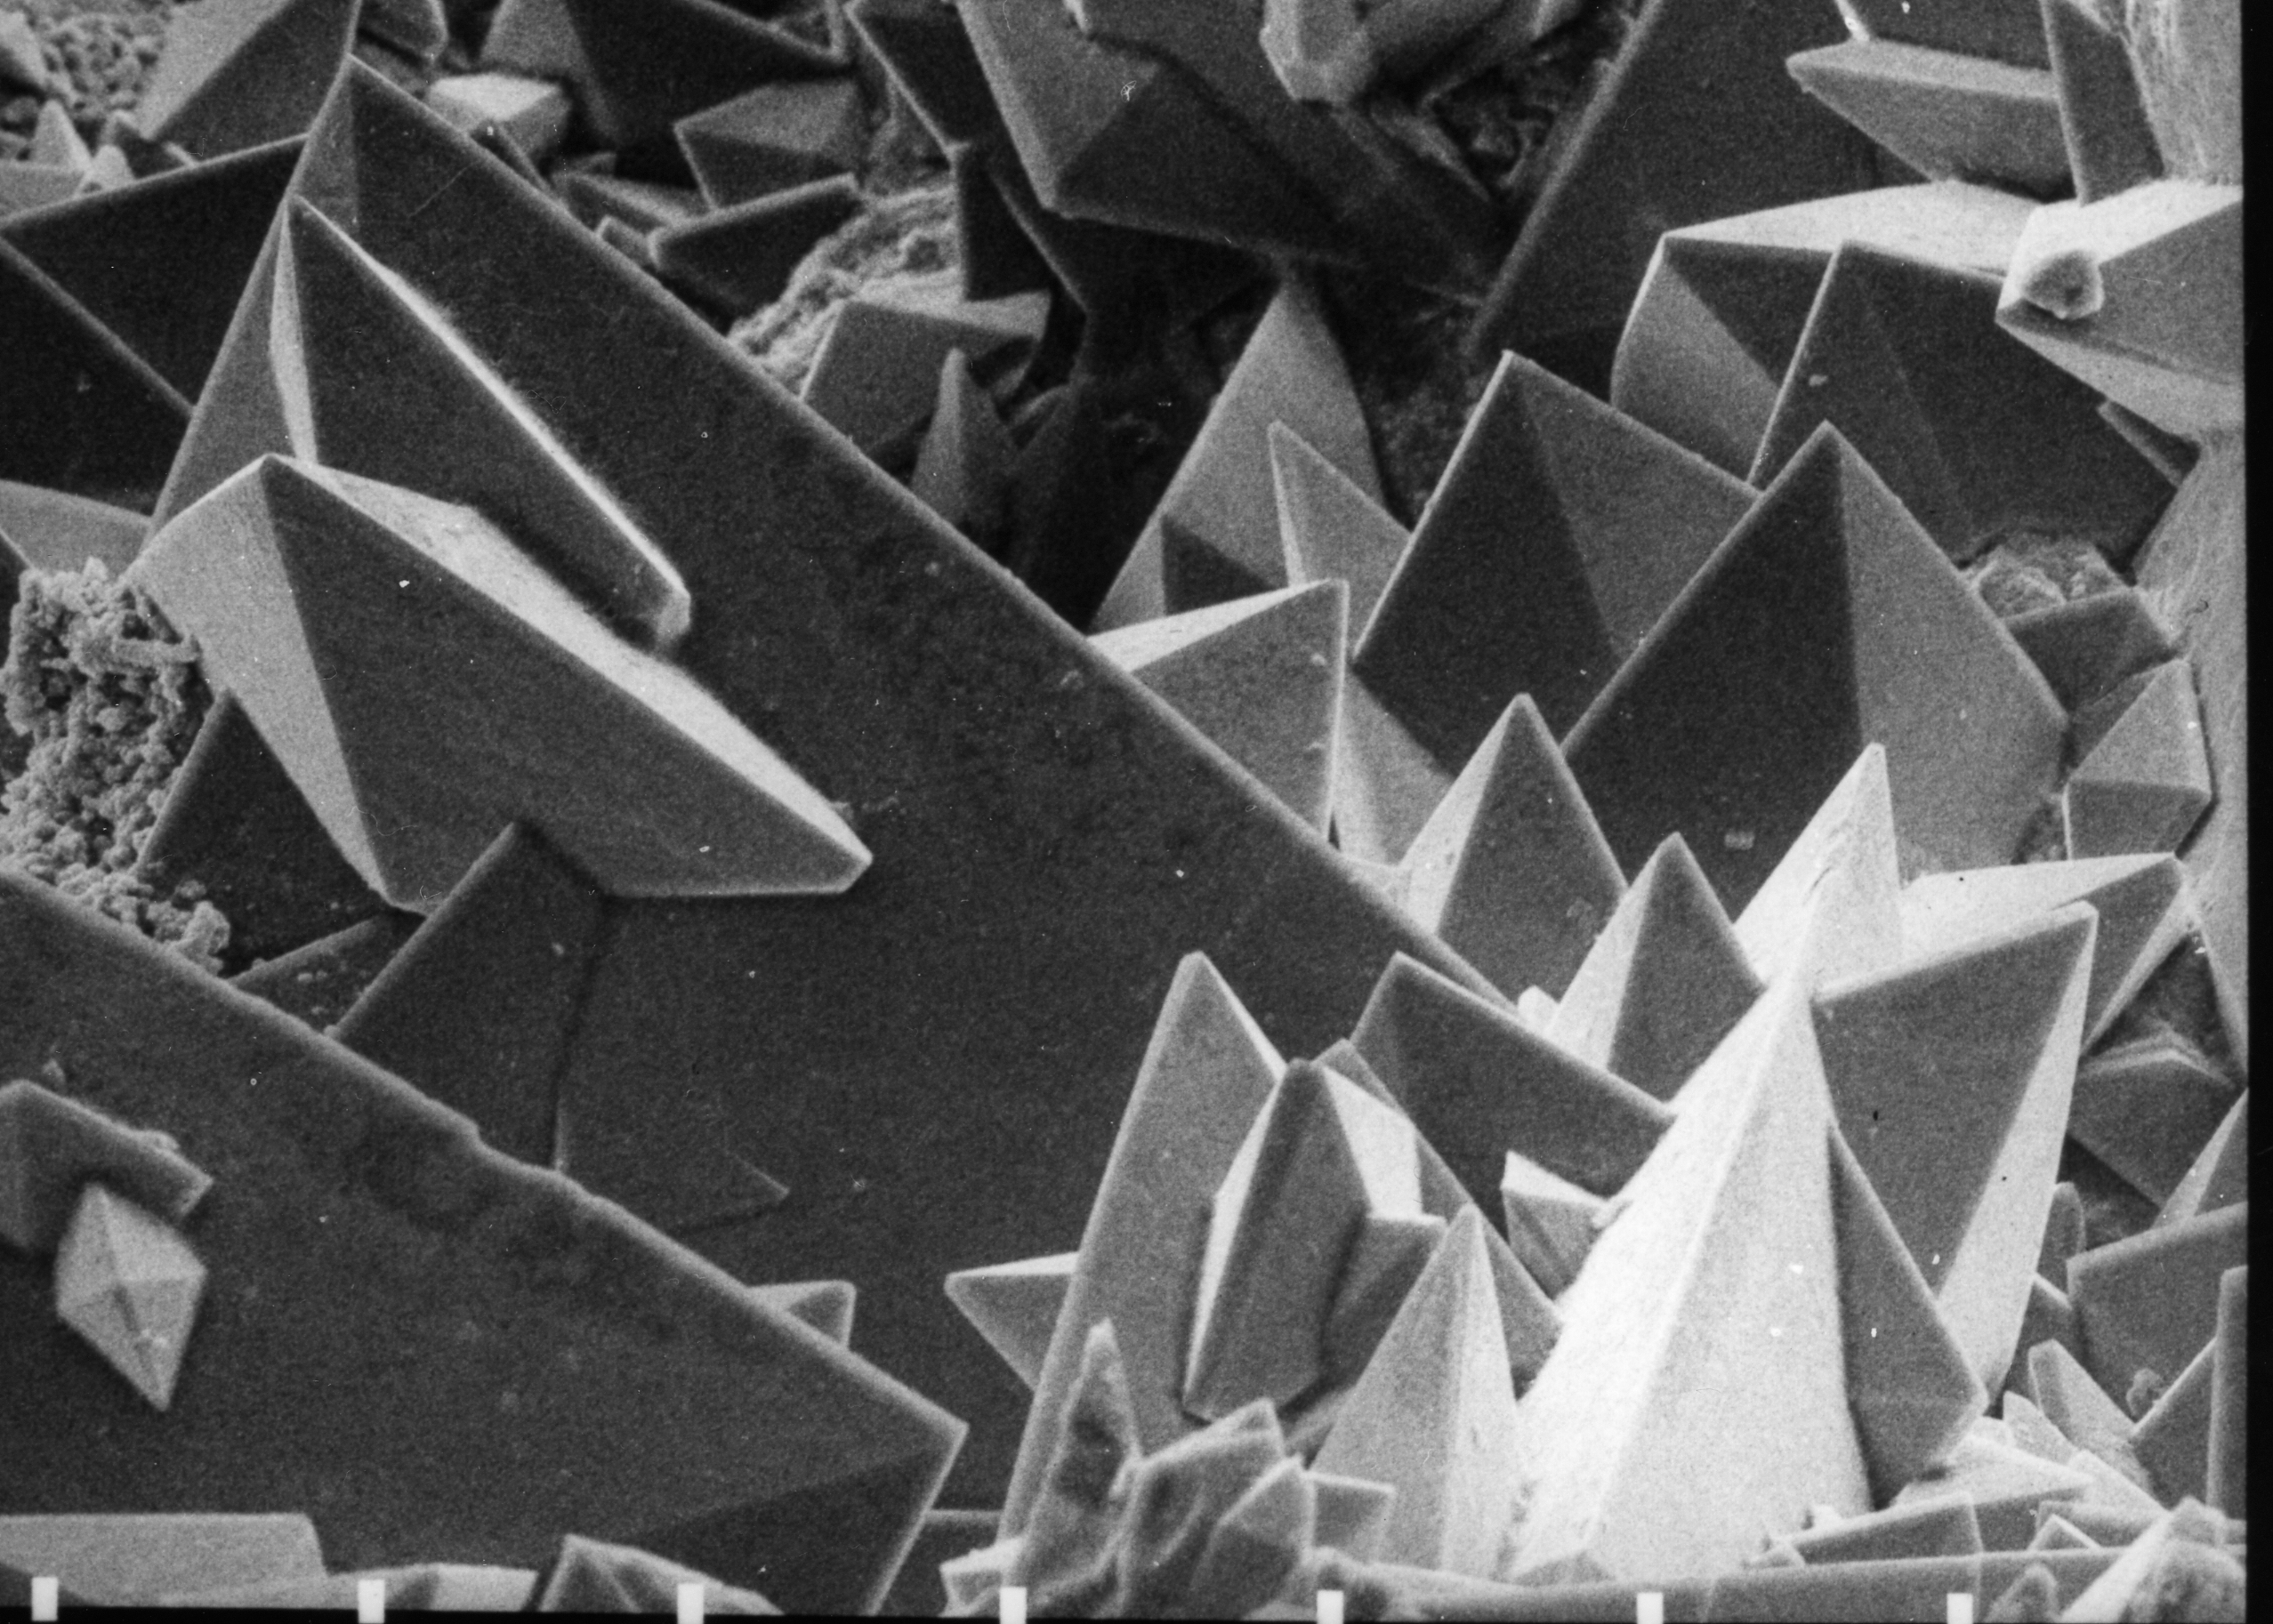 Calcium oxalate dihydrate crystals under Scanning Electron Micrograph (SEM) taken at 30 KV. Source: Wikimedia commons[21]